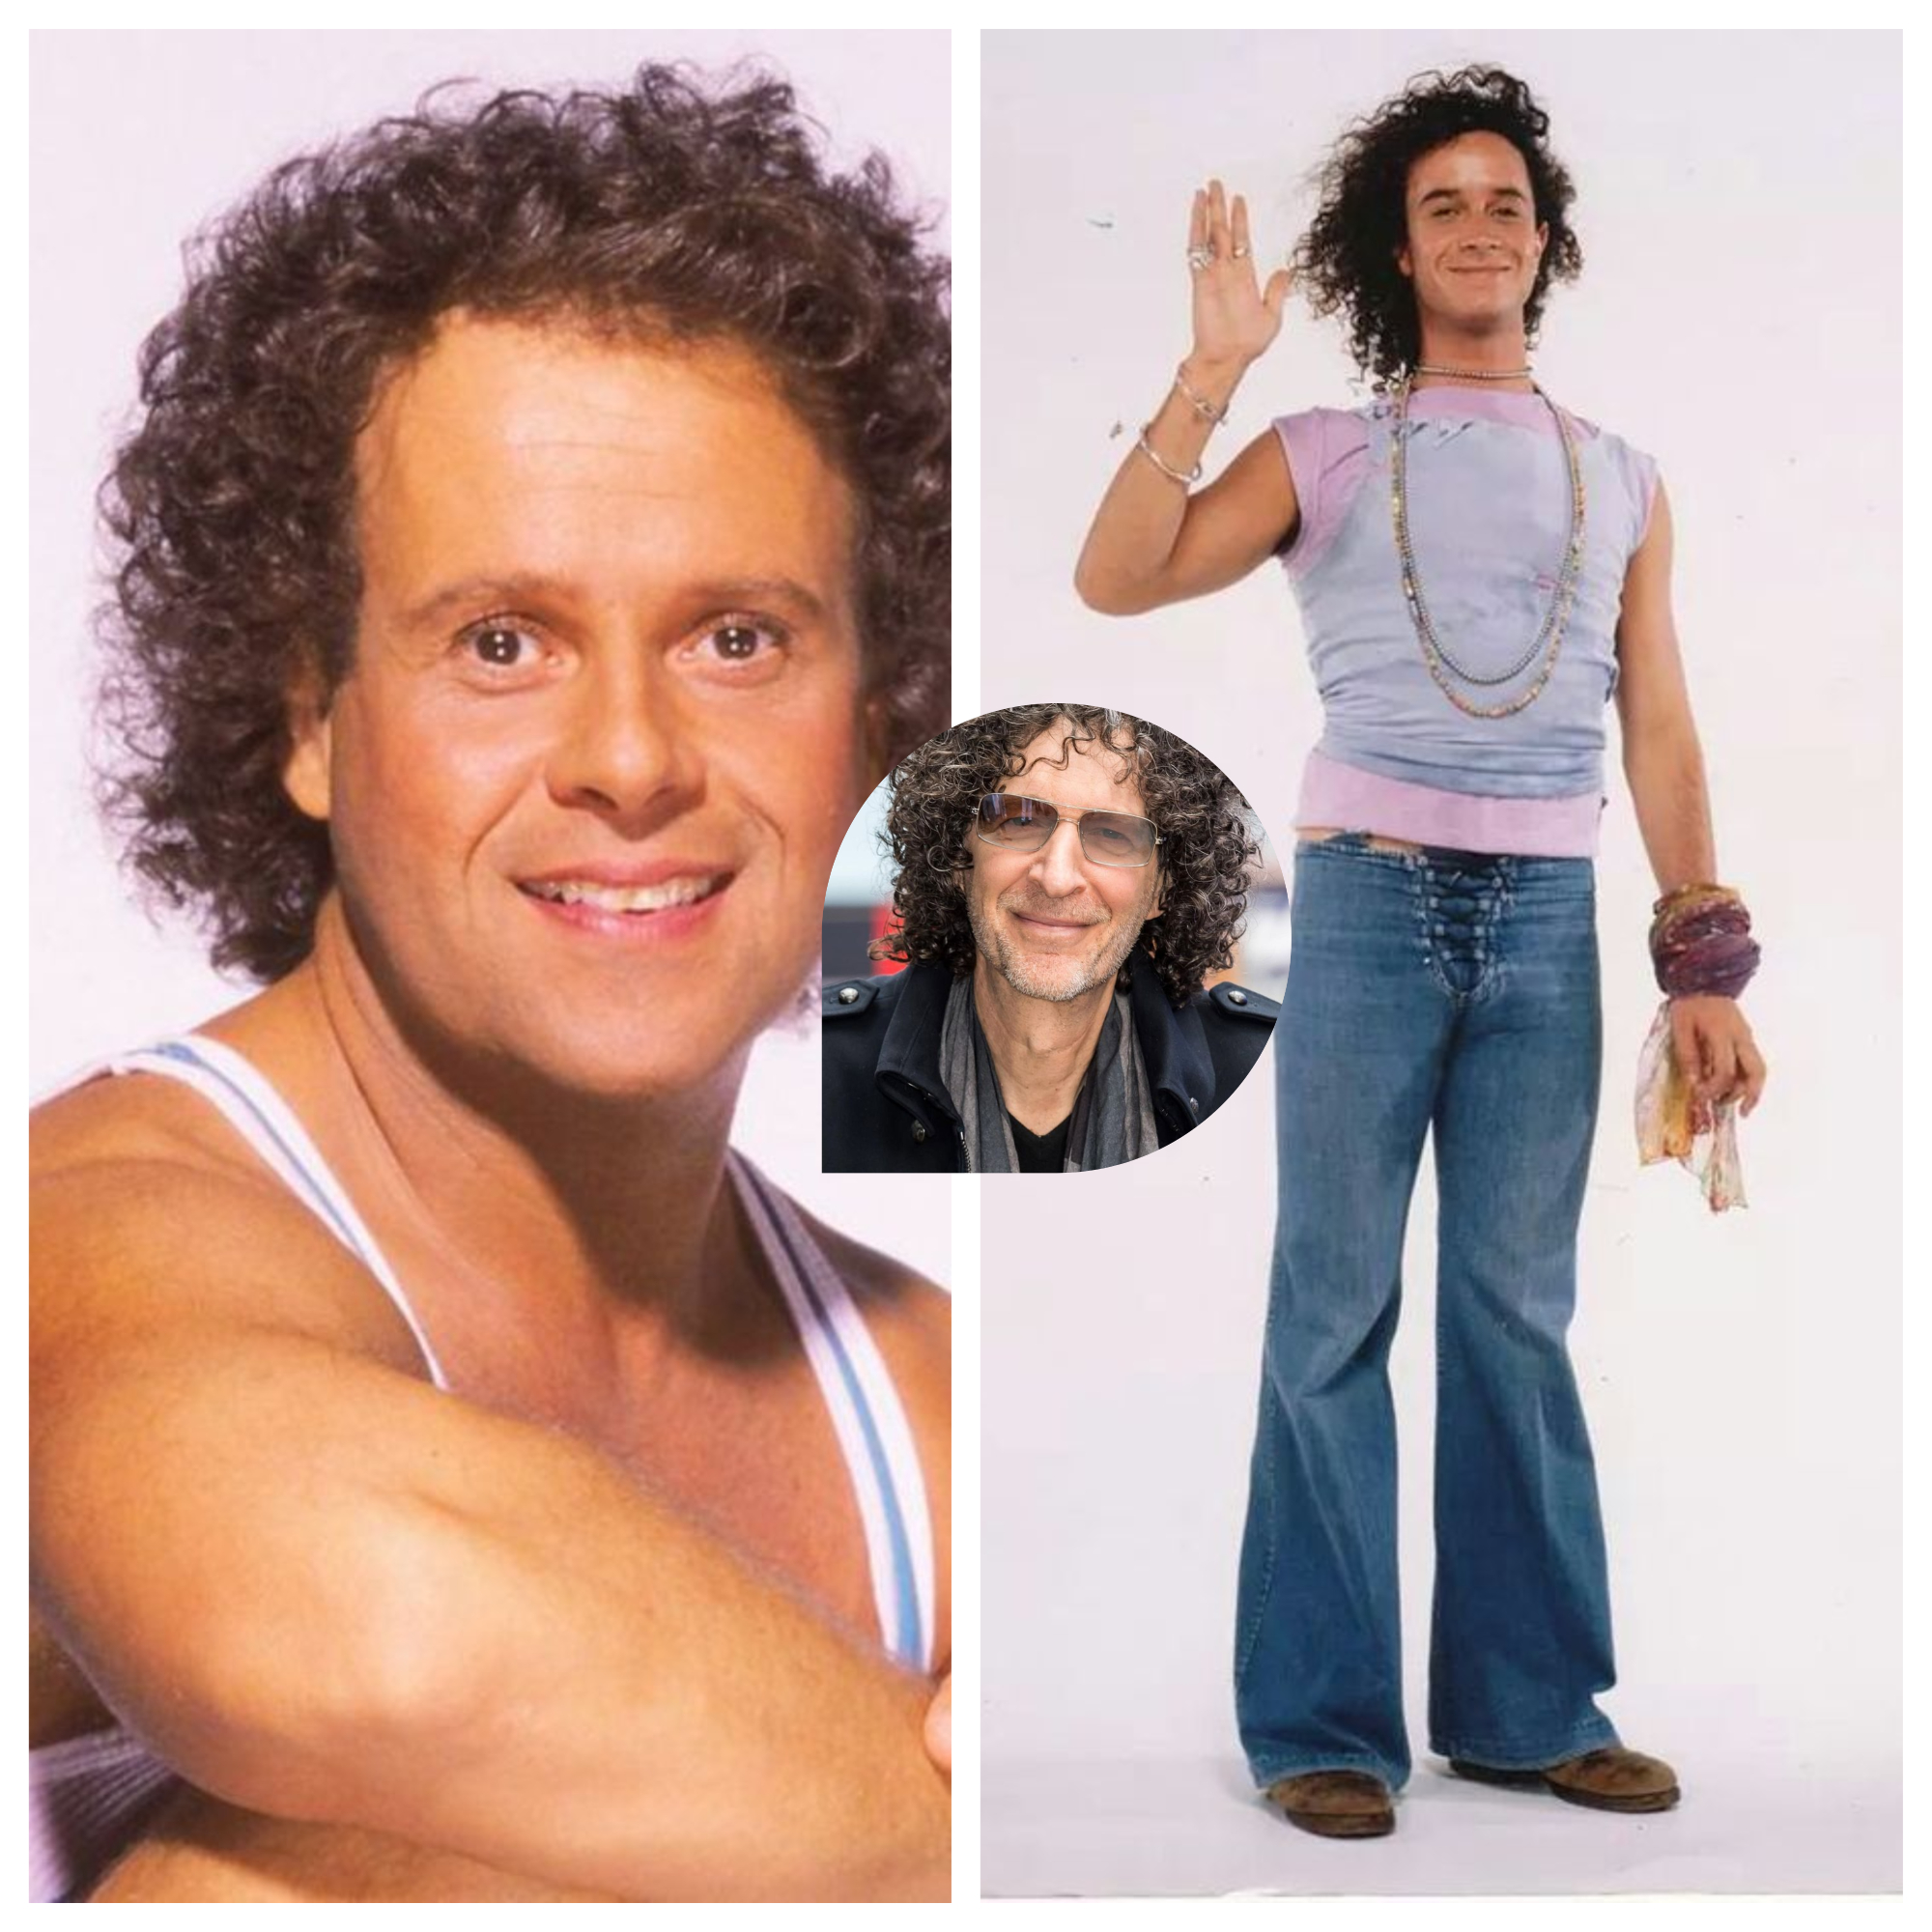 Howard Stern Urges Richard Simmons to Give Pauly Shore a Dose of His Own Medicine